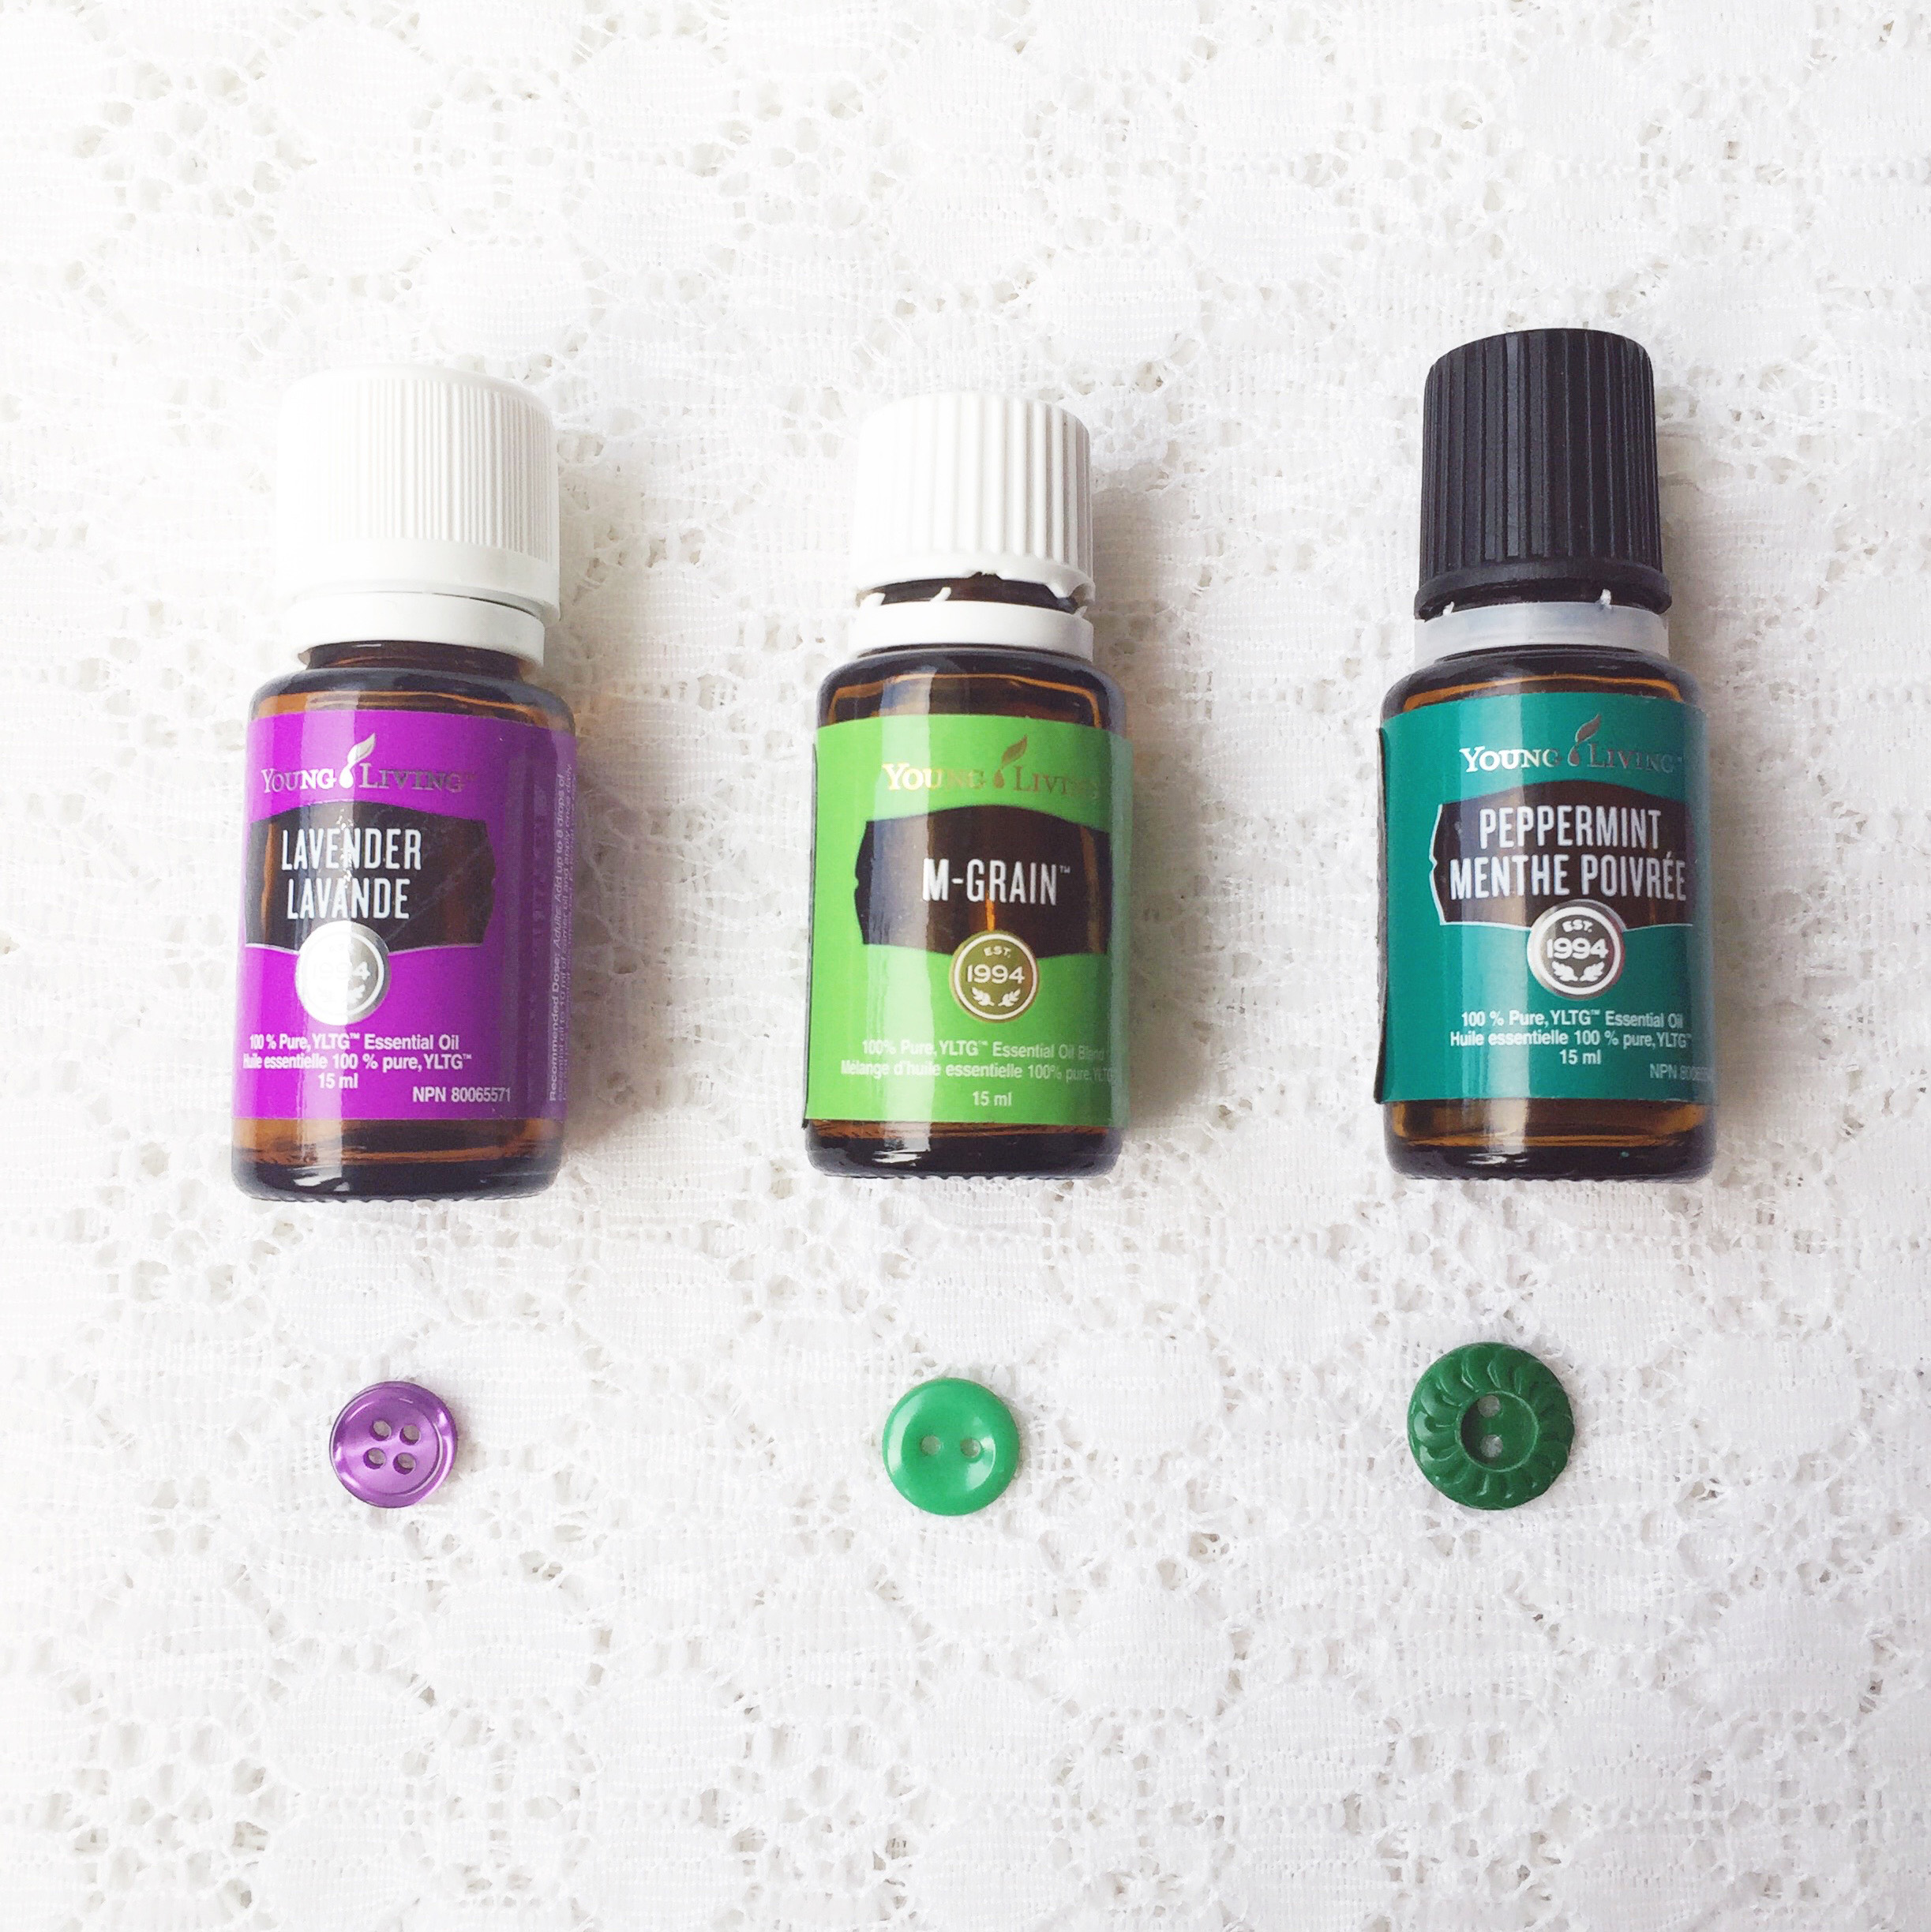 Living With Essential Oils: Releasing Tension ~ Oils for muscle tension & headaches ~ Blog post by Bubblegum Sass